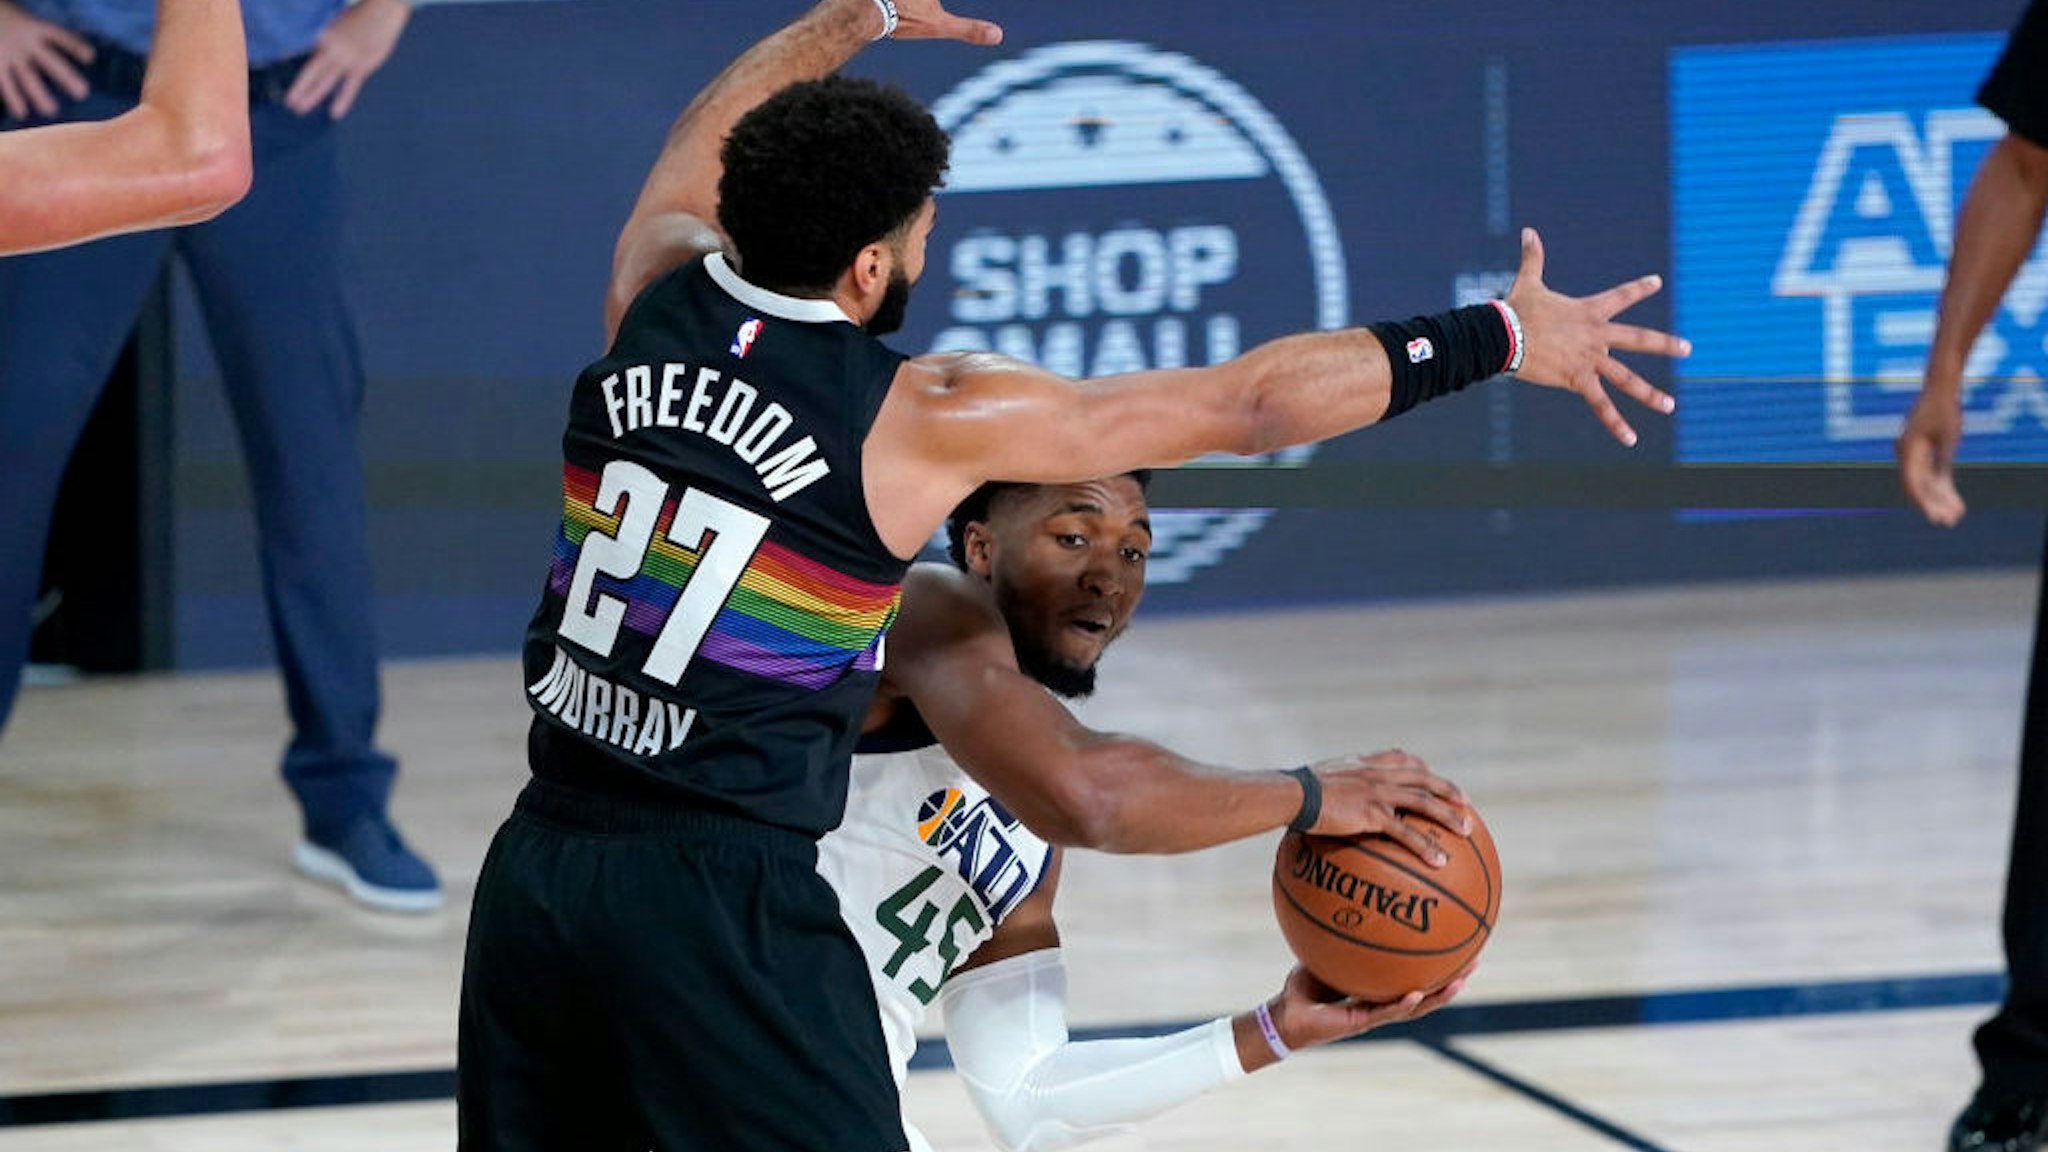 Utah Jazz's Donovan Mitchell (45) is pressured by Denver Nuggets' Jamal Murray (27) during the first half of an NBA basketball first round playoff game, Monday, Aug. 3, 2020, in Lake Buena Vista, Fla.(AP Photo/Ashley Landis, Pool)